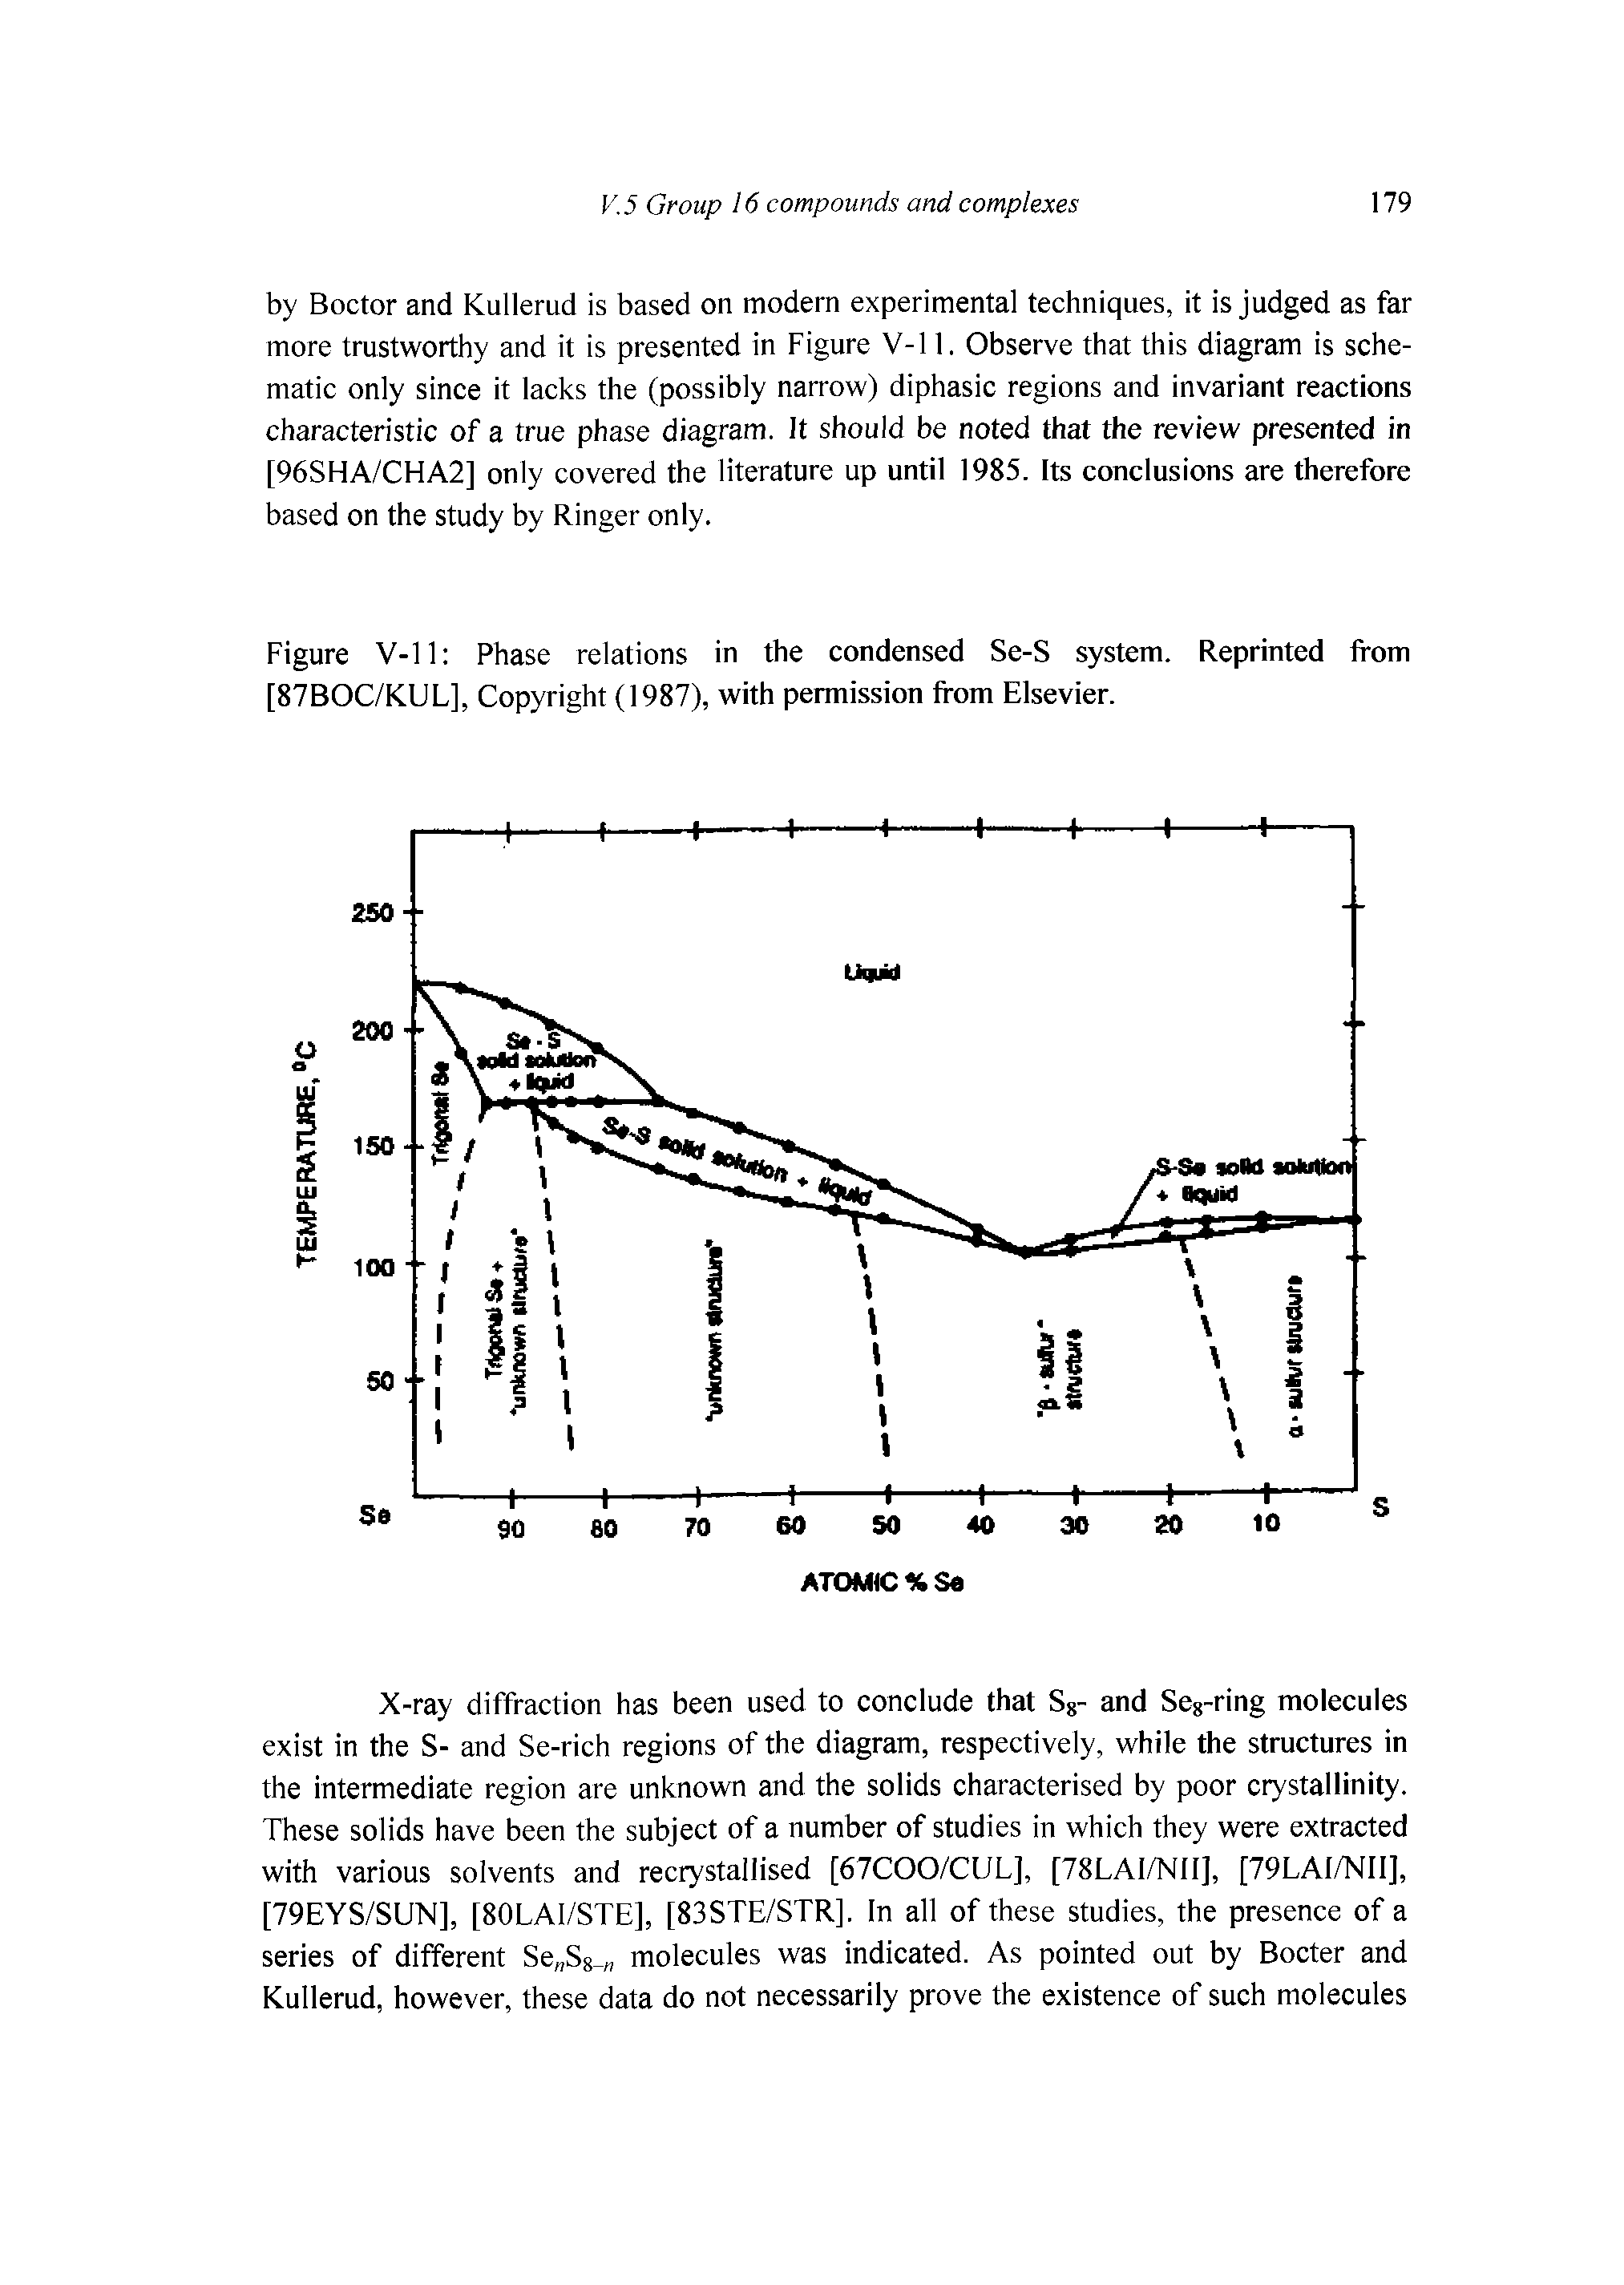 Figure V-11 Phase relations in the condensed Se-S system. Reprinted from [87BOC/KUL], Copyright (1987), with permission from Elsevier.